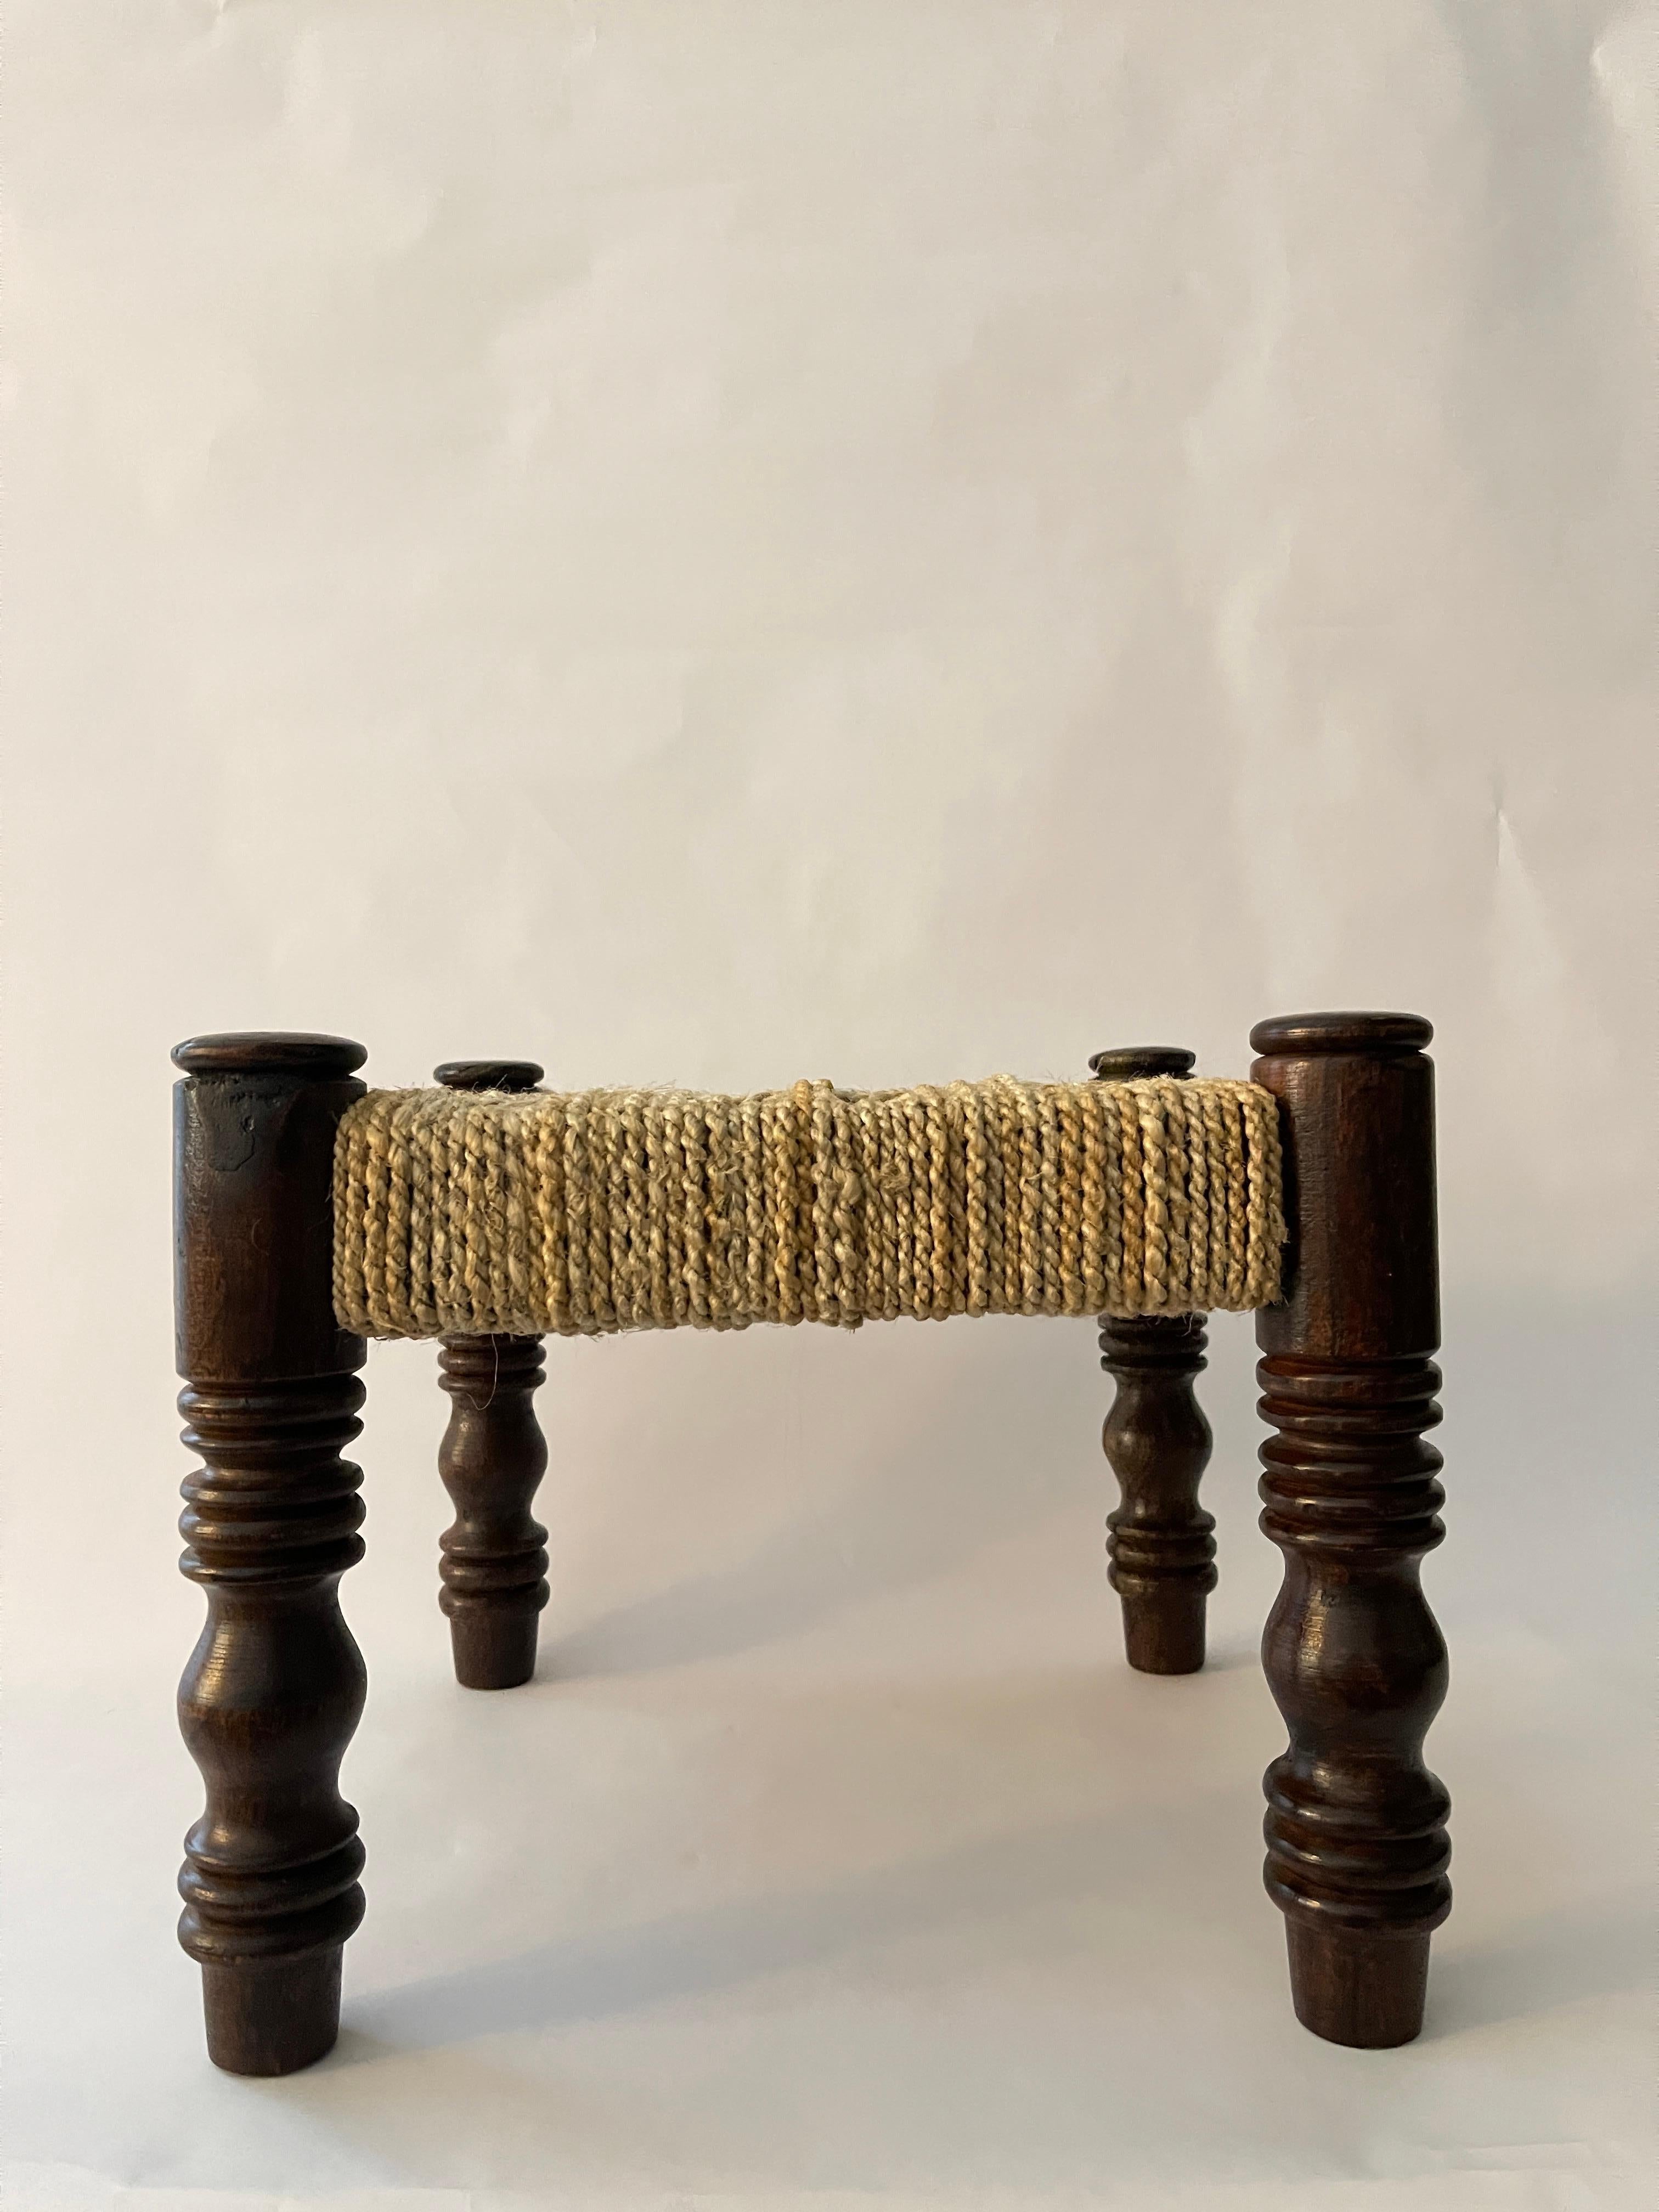 20th Century French Woven Mini Stool on beautiful dark wood legs. Unique woven pattern and marvelous hand crafted legs. Perfect statement piece for any room!